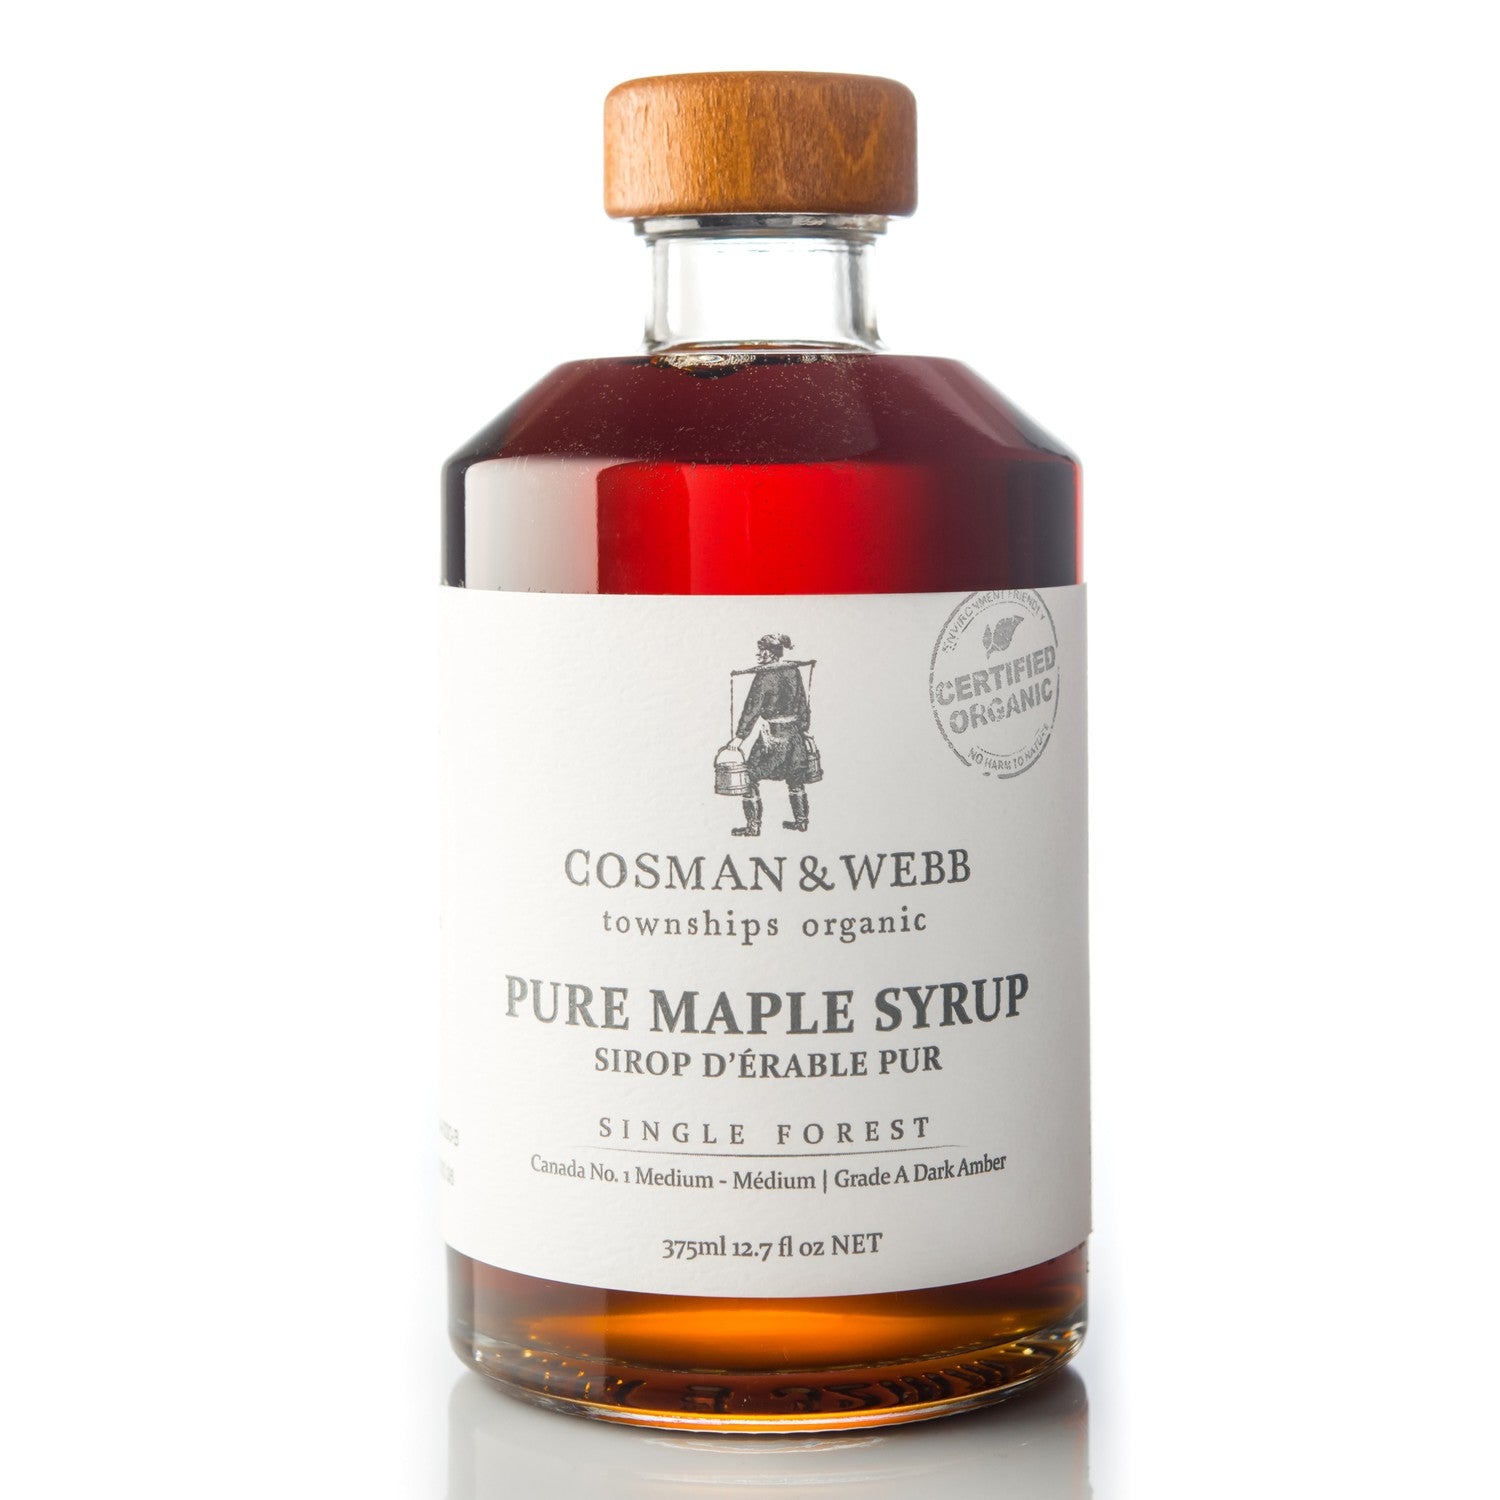 Gorgeous maple syrup from Quebec